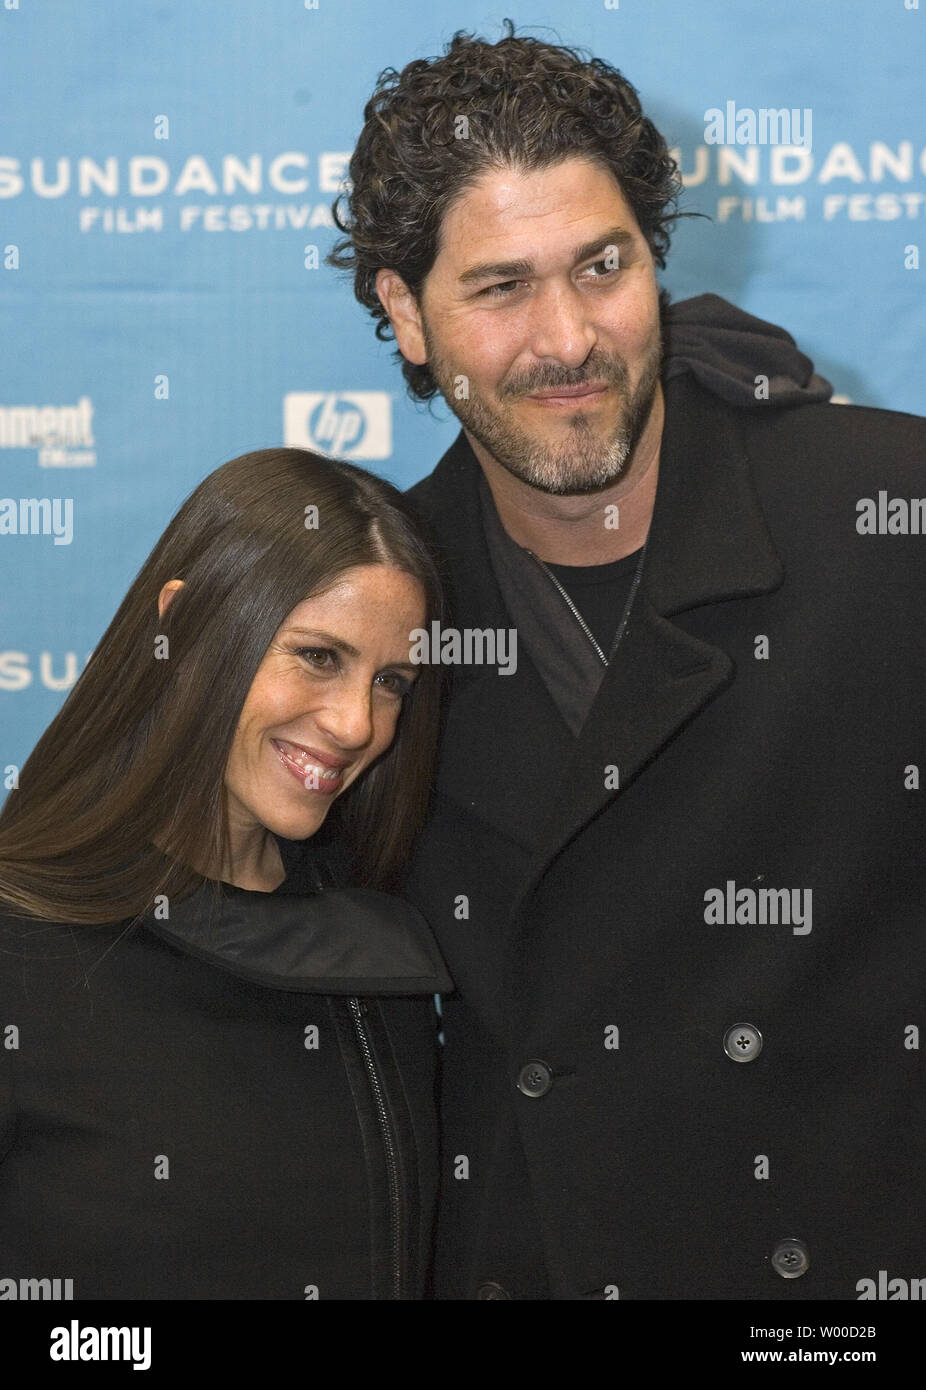 Producer Jawson Goldberg and wife Soleil Moon Frye attend the premiere of 'Spread' at the 2009 Sundance Film Festival in Park City, Utah on January 17, 2009. The festival is celebrating its 25th anniversary.   (UPI Photo/Gary C. Caskey) Stock Photo